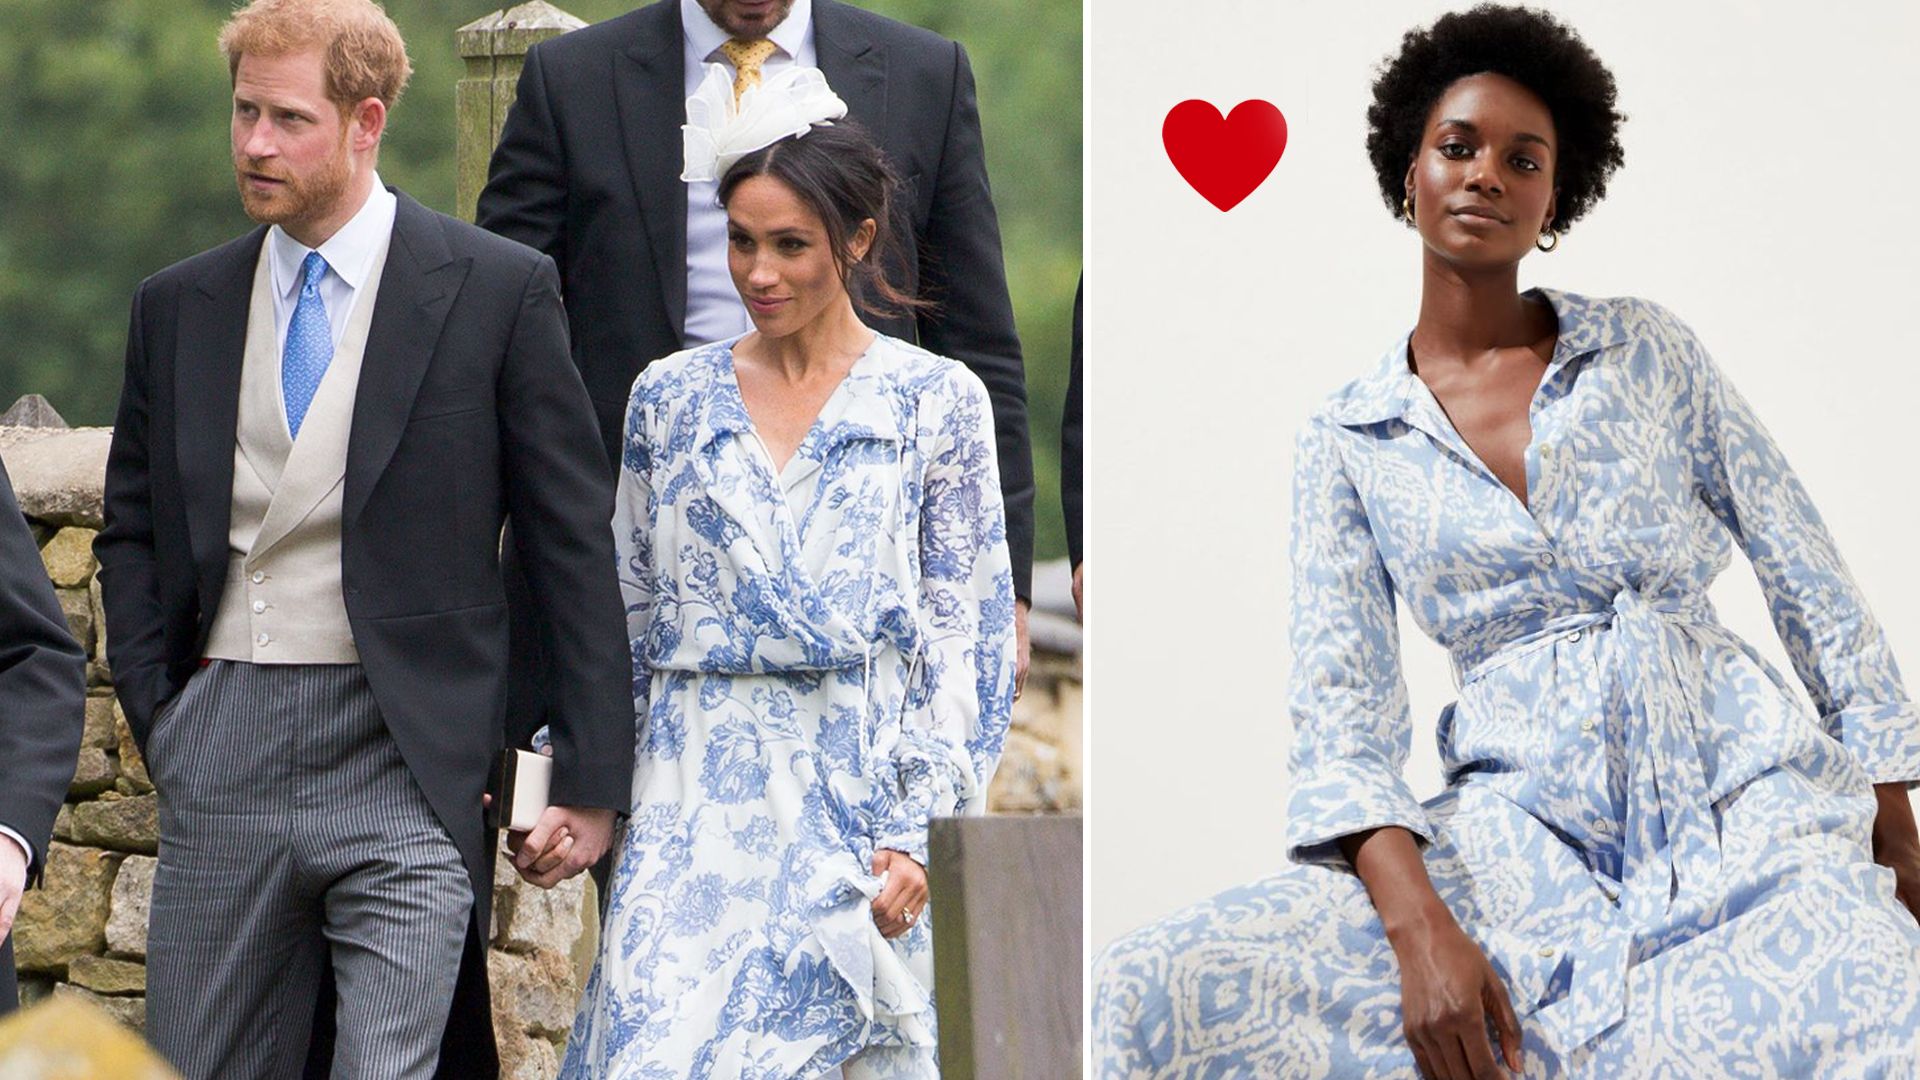 What the Duchess of Sussex's summer dress and flats tell us about